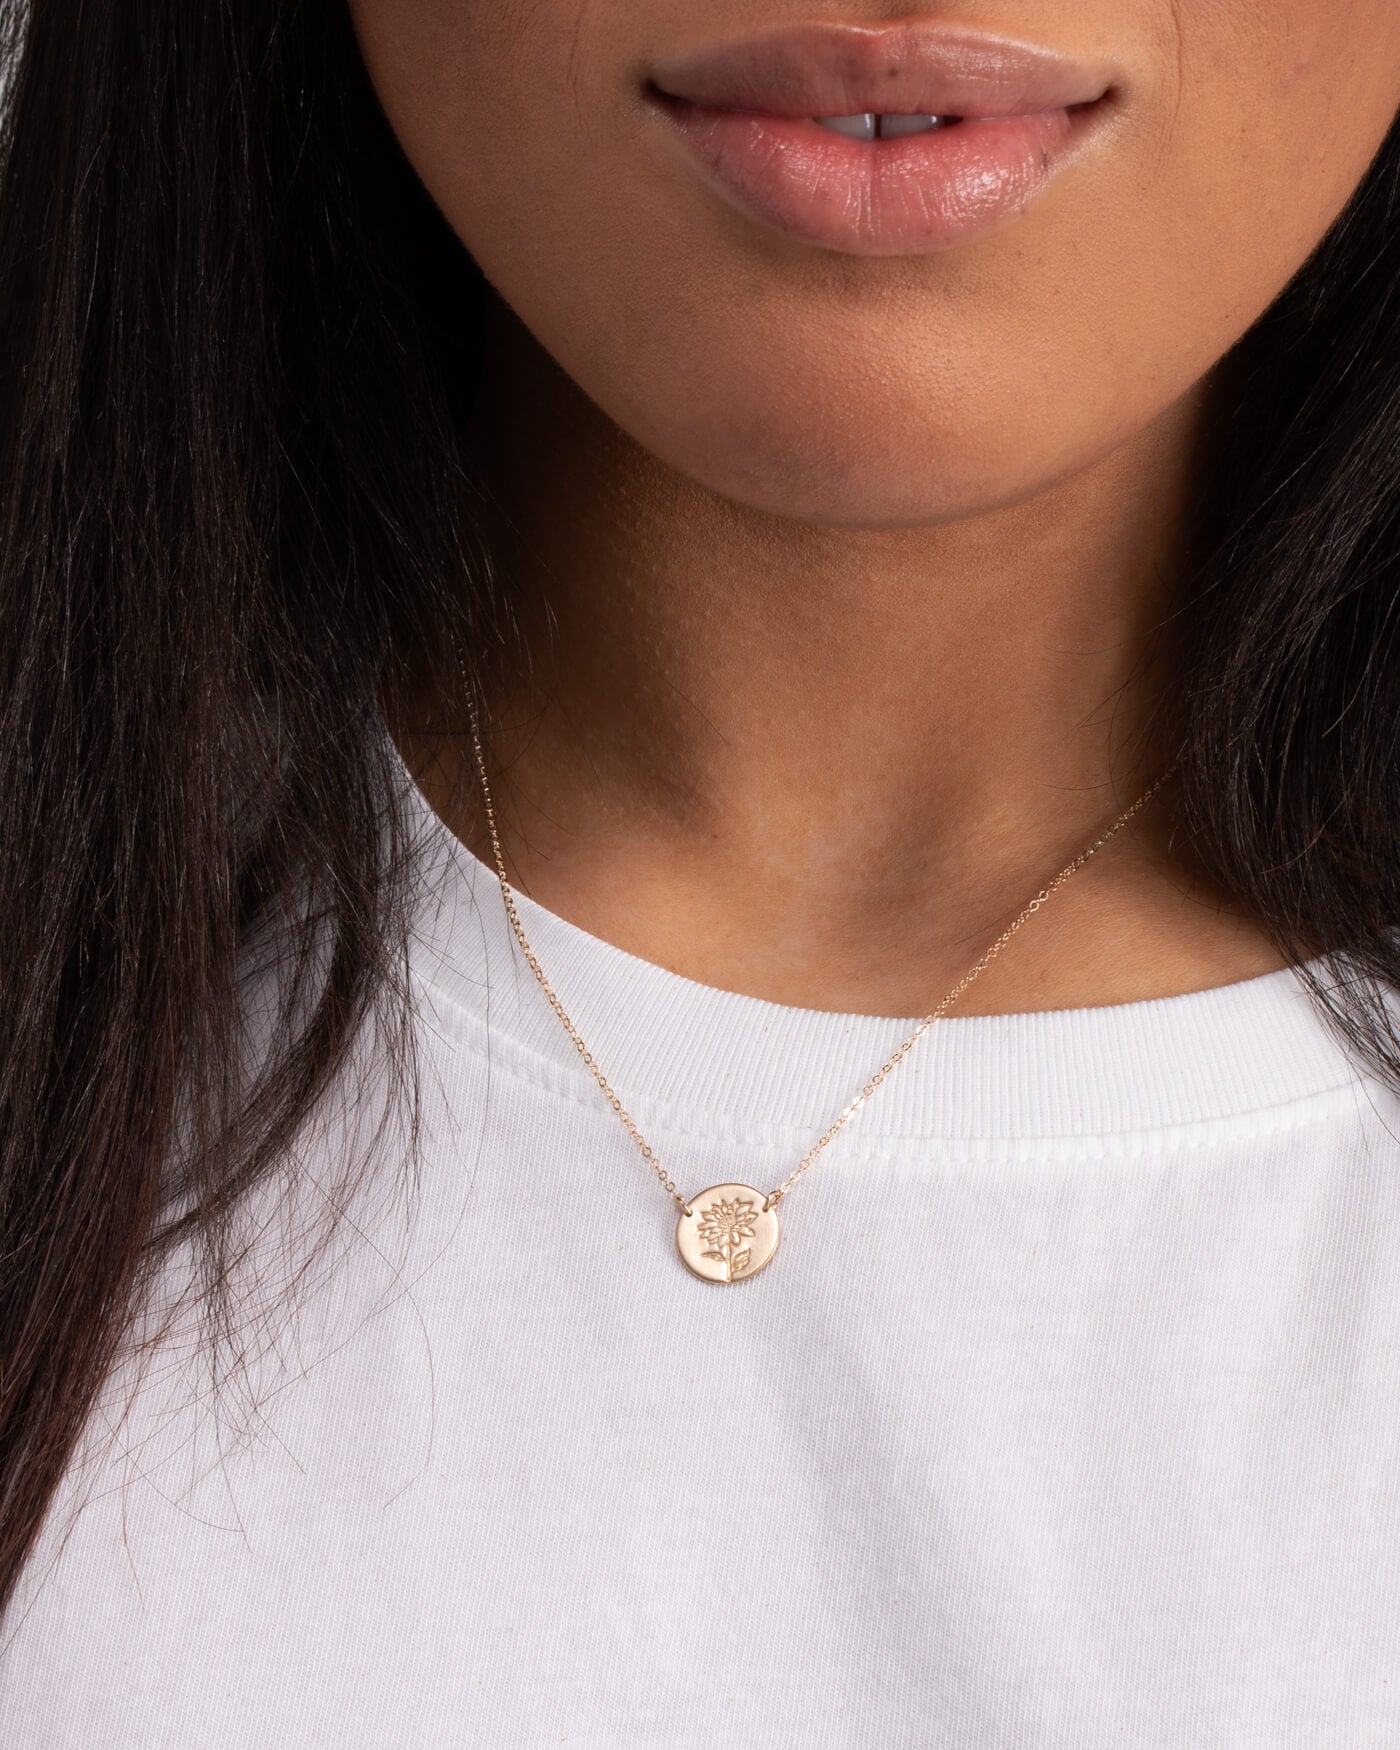 GLDN Small Flower Personalized Necklace 14K Gold Fill / Daffodil